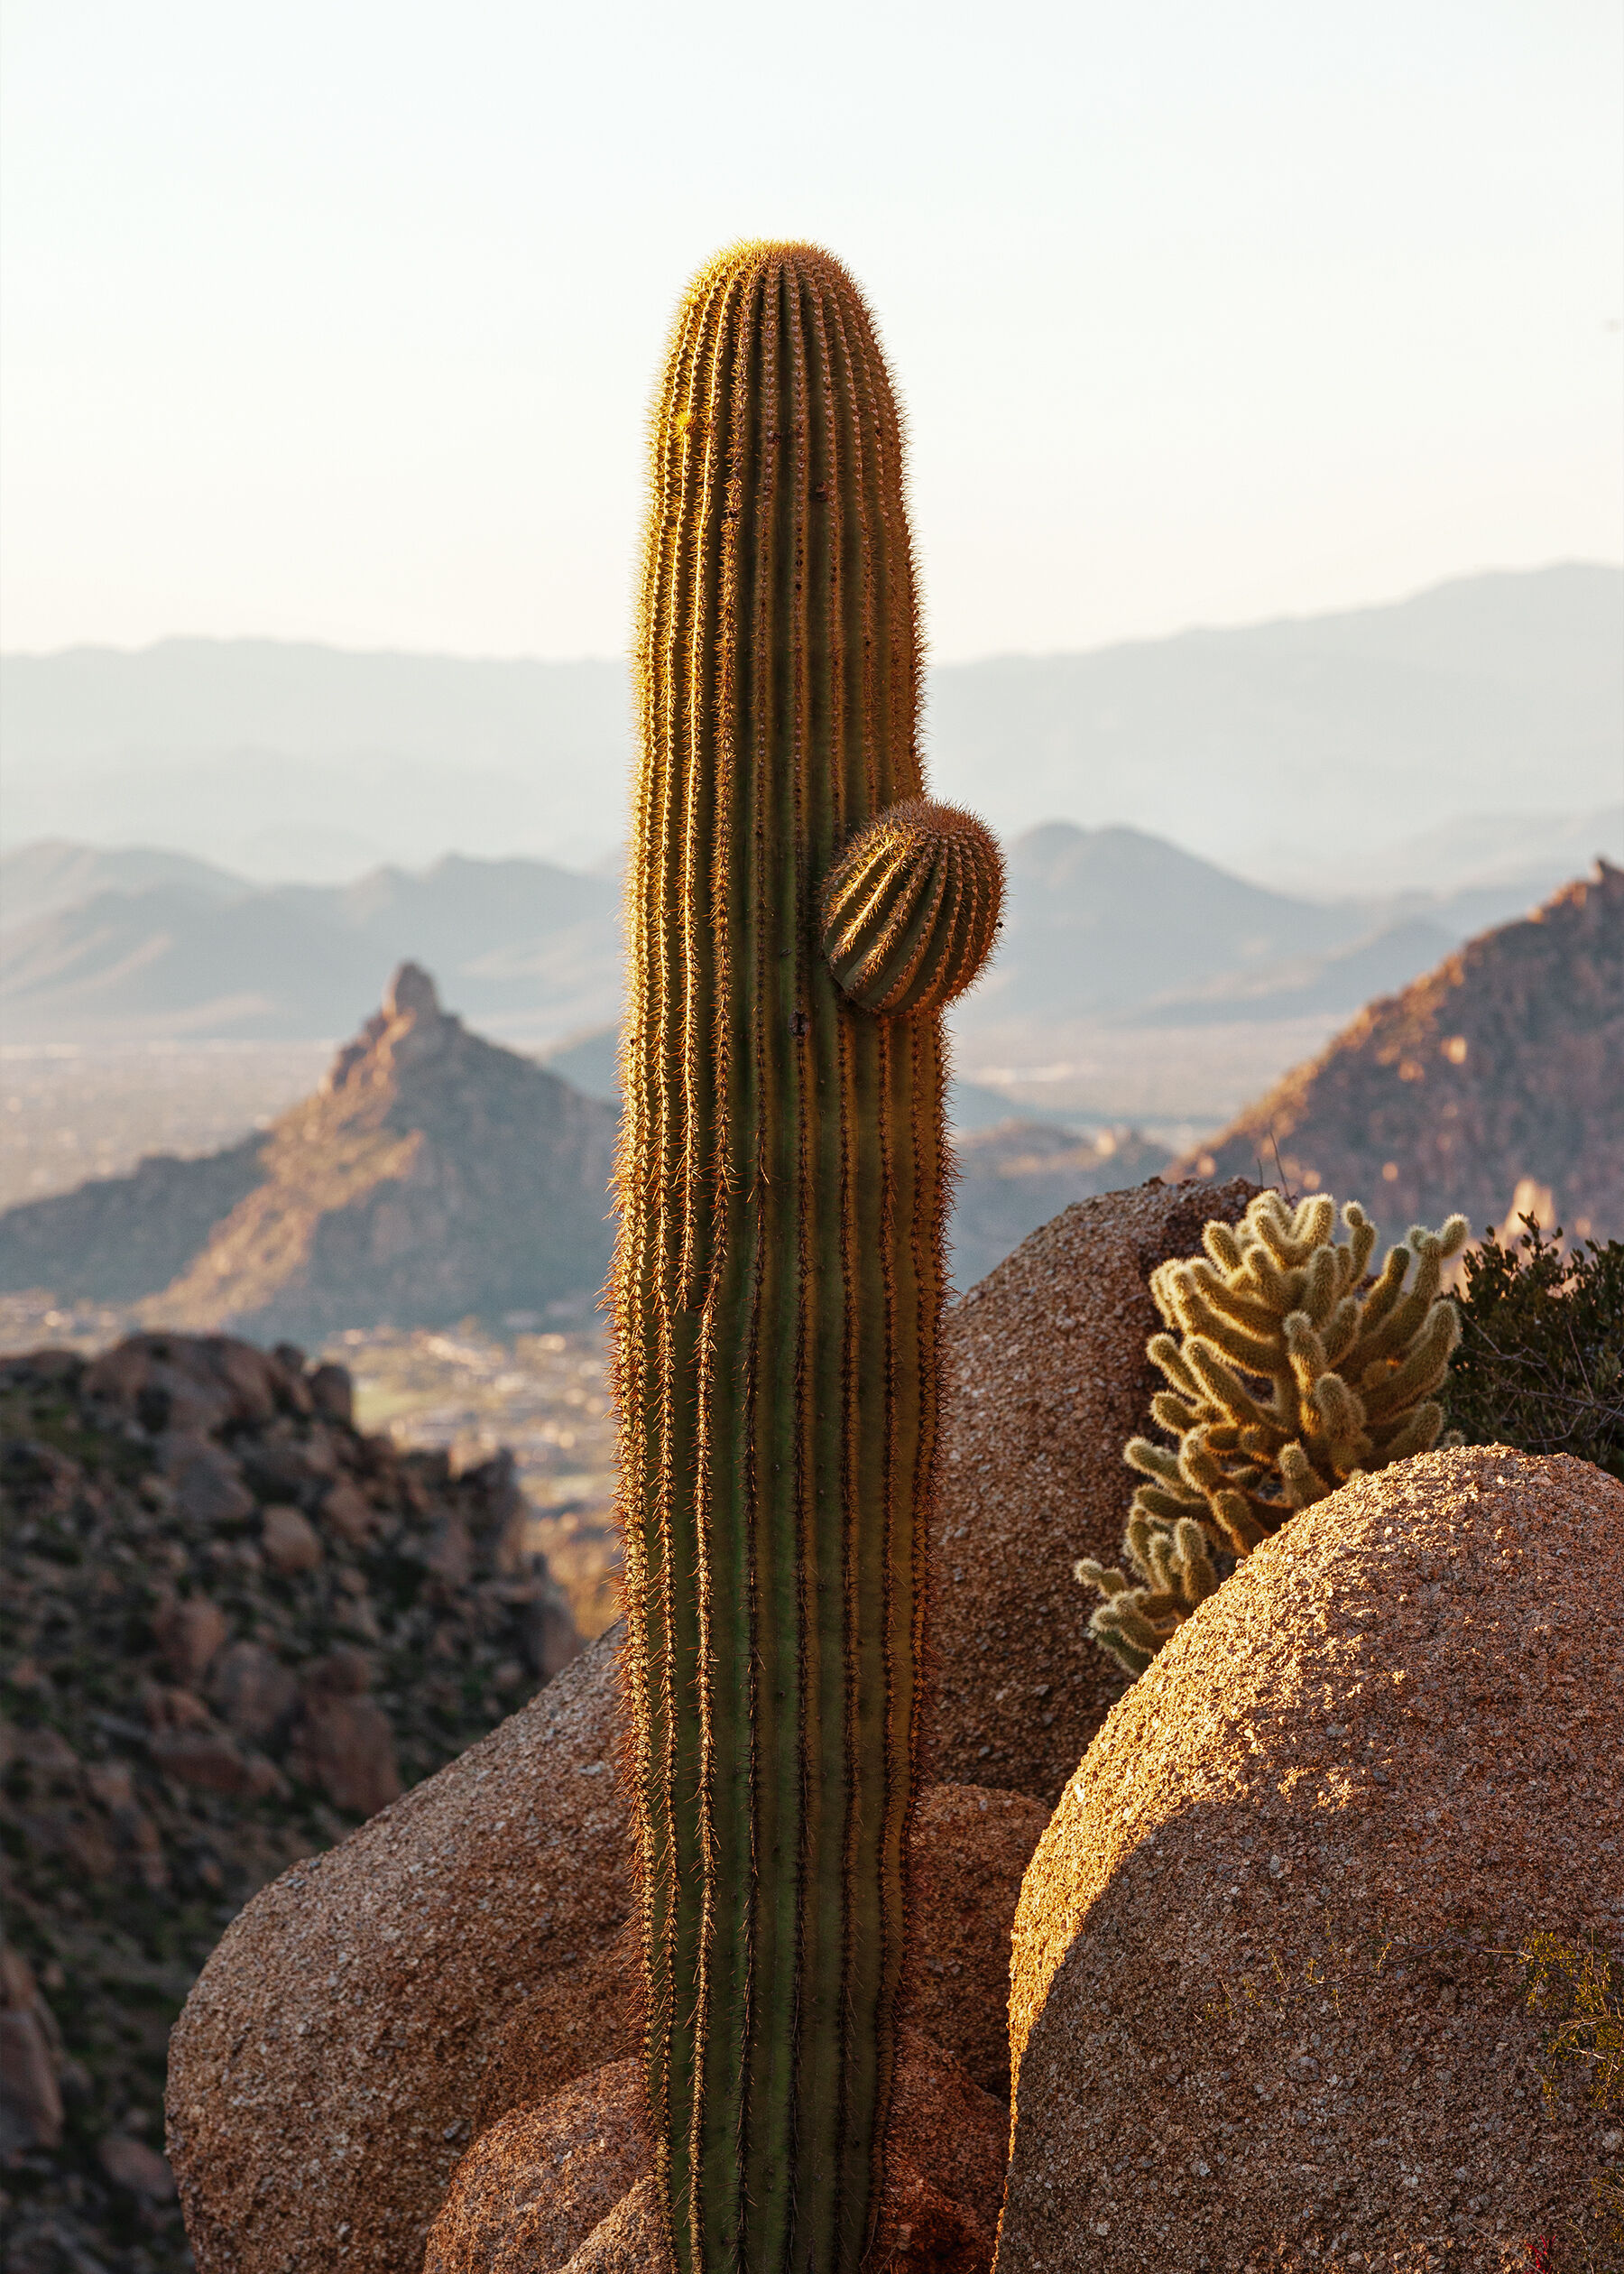 Saguaro cactus at Tom's Thumb, Arizona with layers of sunlit mountains in the background